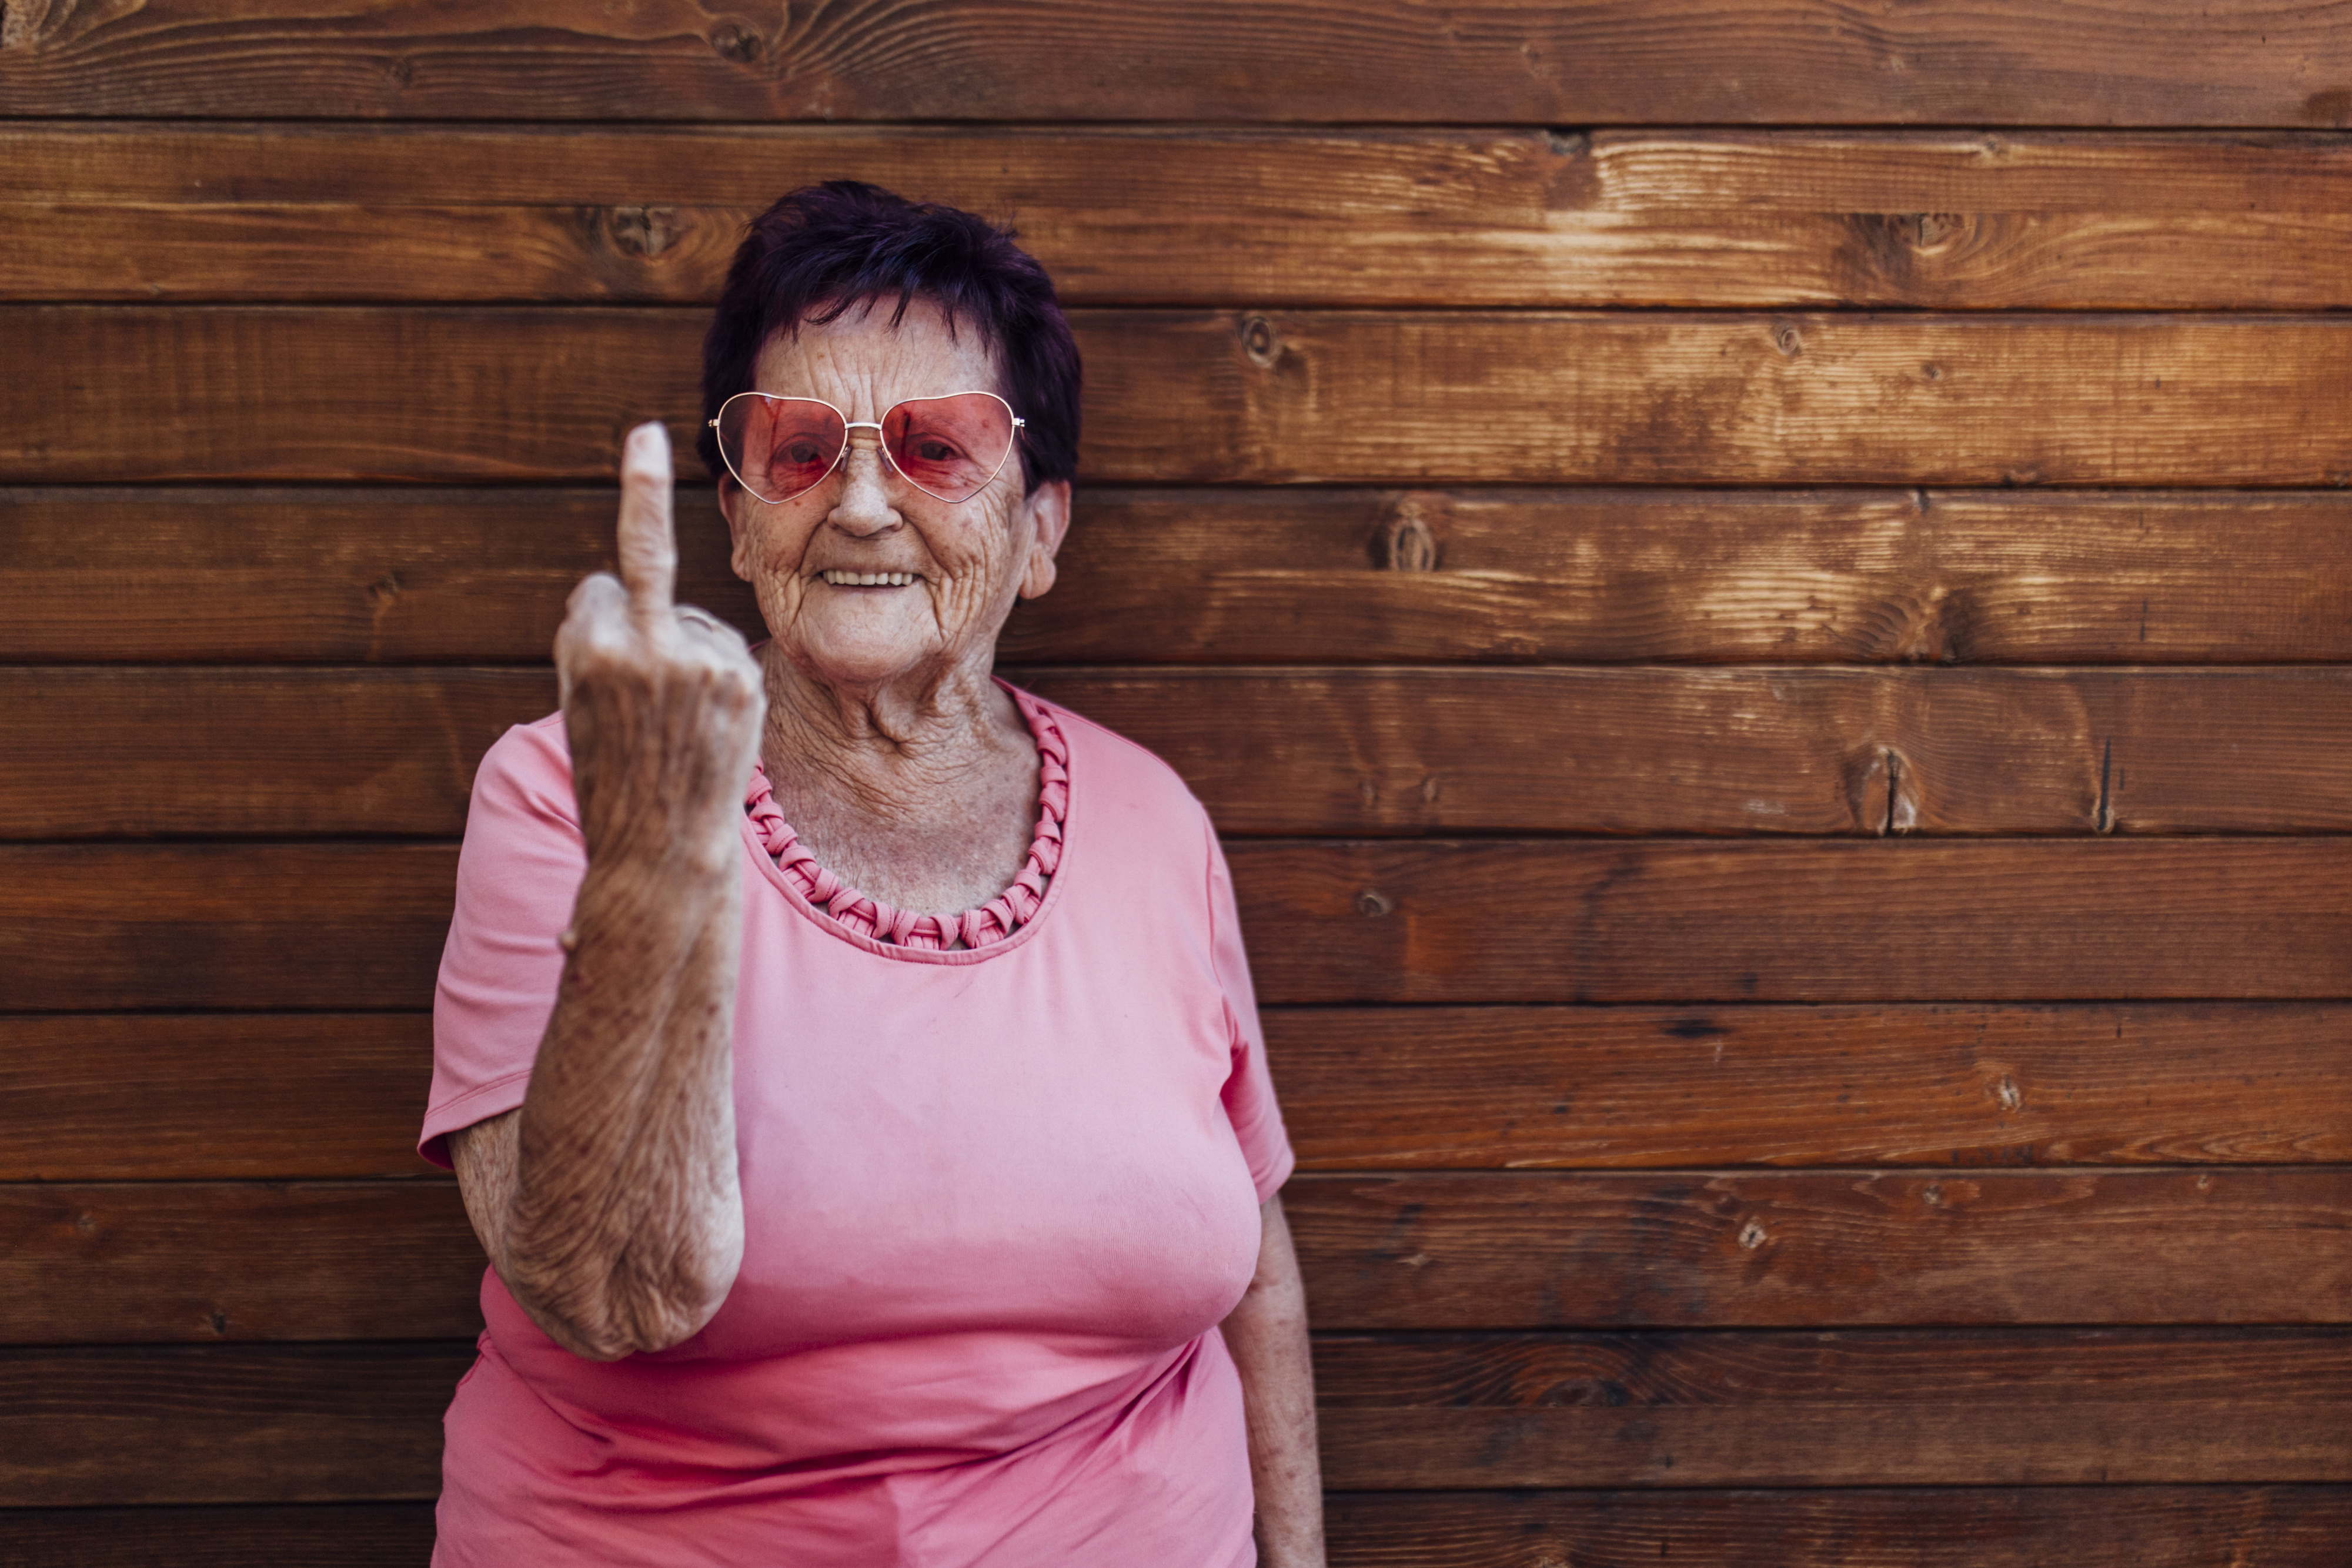 An elderly woman in a pink top and pink glasses stands against a wooden wall, smiling mischievously while raising her middle finger at the camera